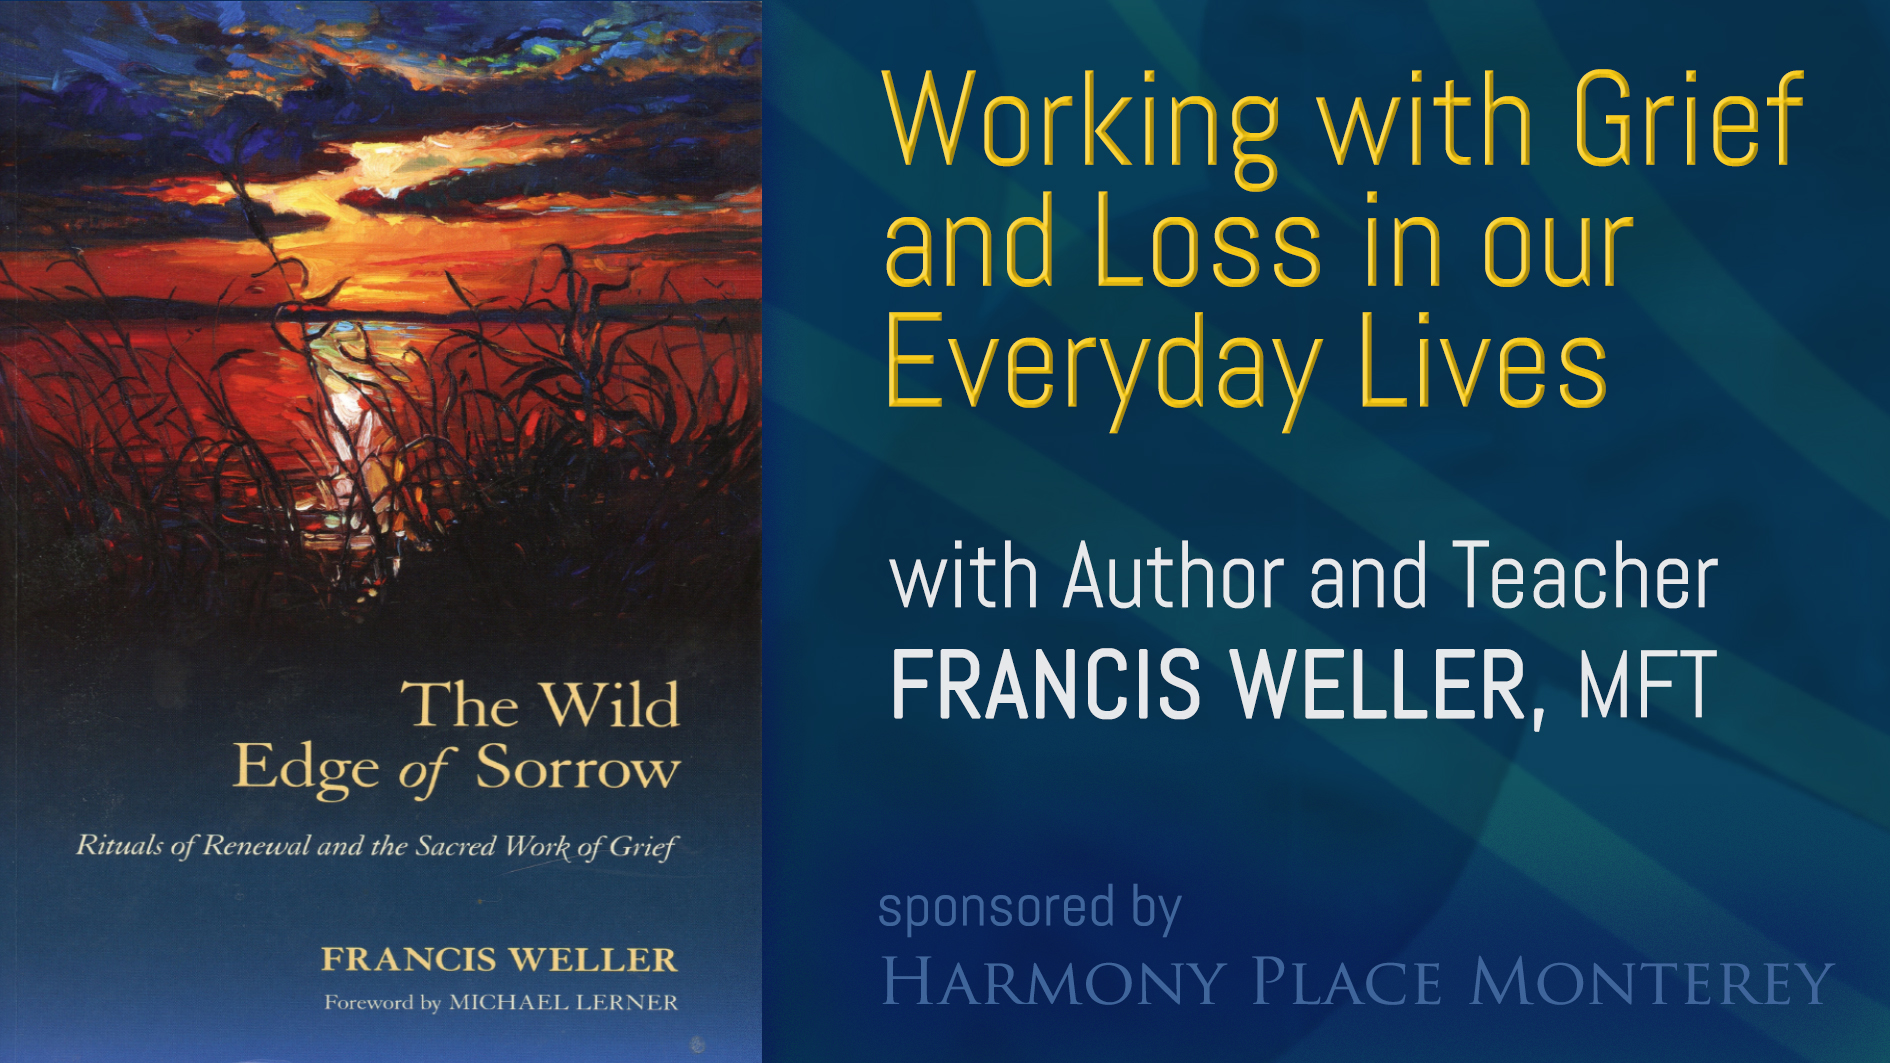 WORKSHOP VIDEO: “The Wild Edge of Sorrow” with Author Francis Weller, MFT